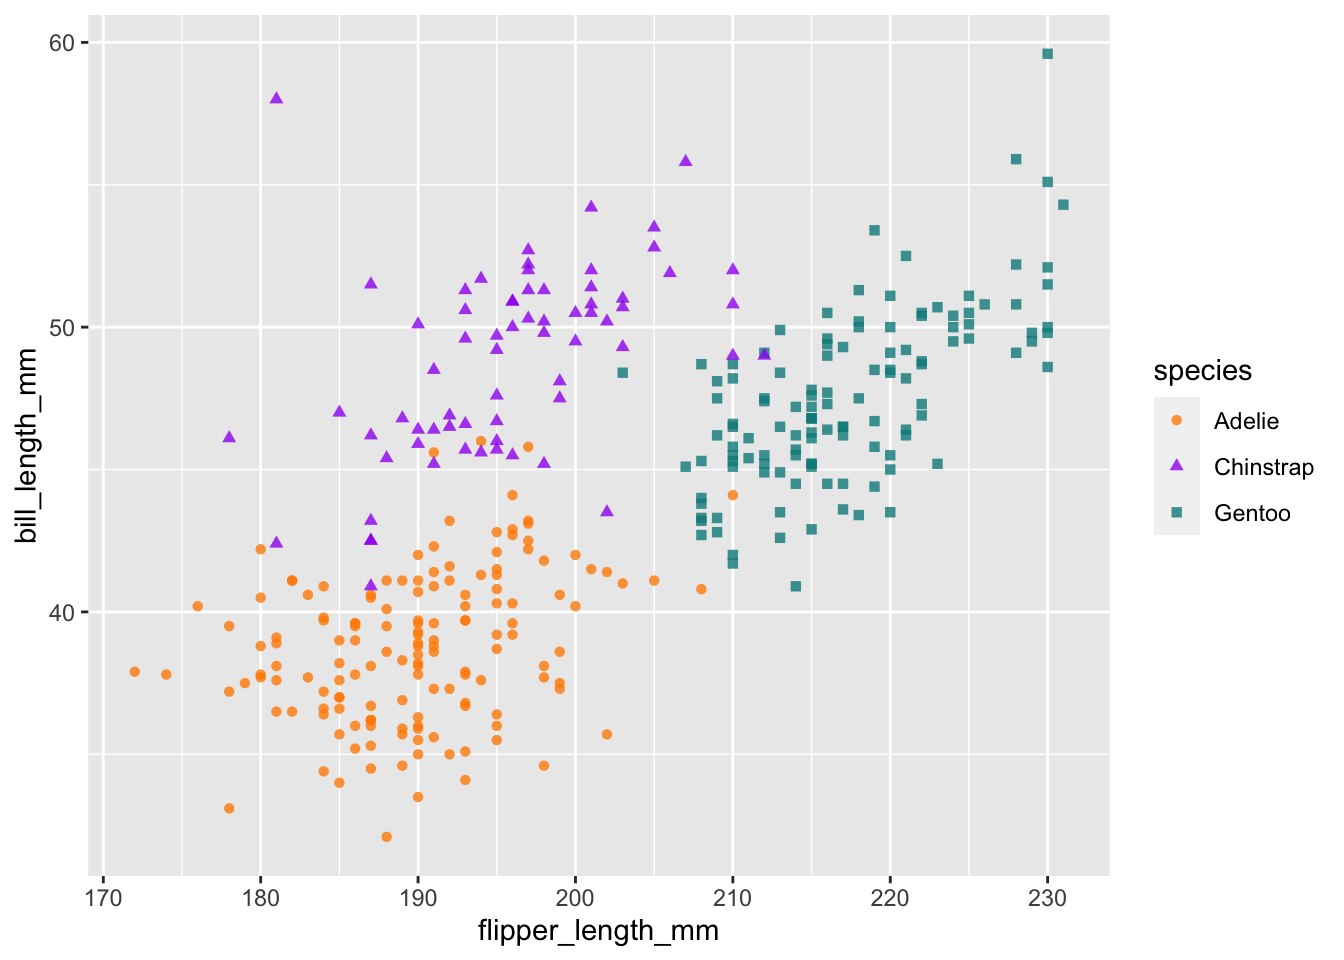 Scatterplot of flipper length by bill length of 3 penguin species, where we show penguins with bigger flippers have bigger bills.